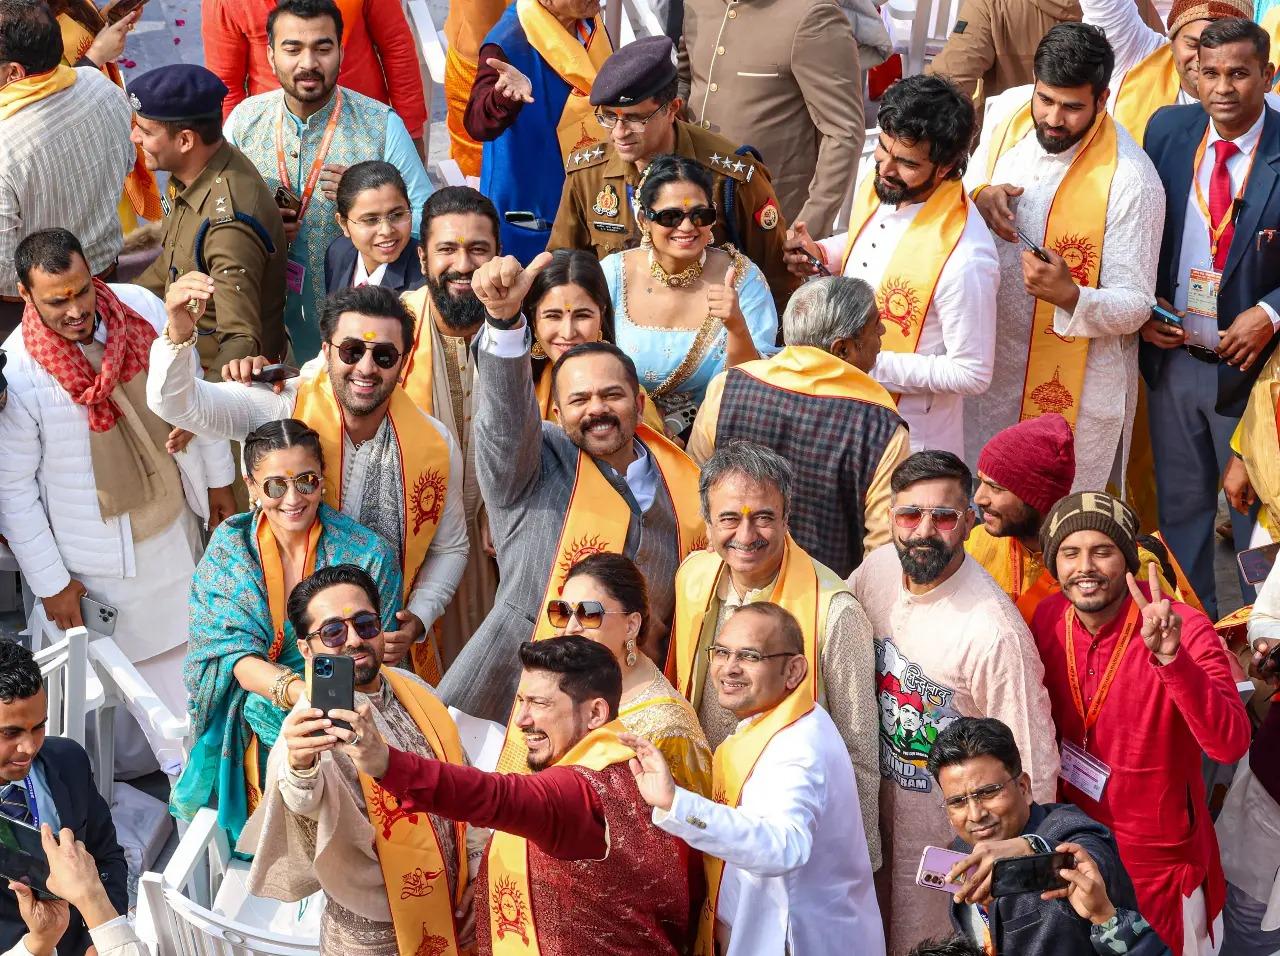 Several Bollywood stars gathered for the Ram Mandir inauguration. How many can you spot in this image? 